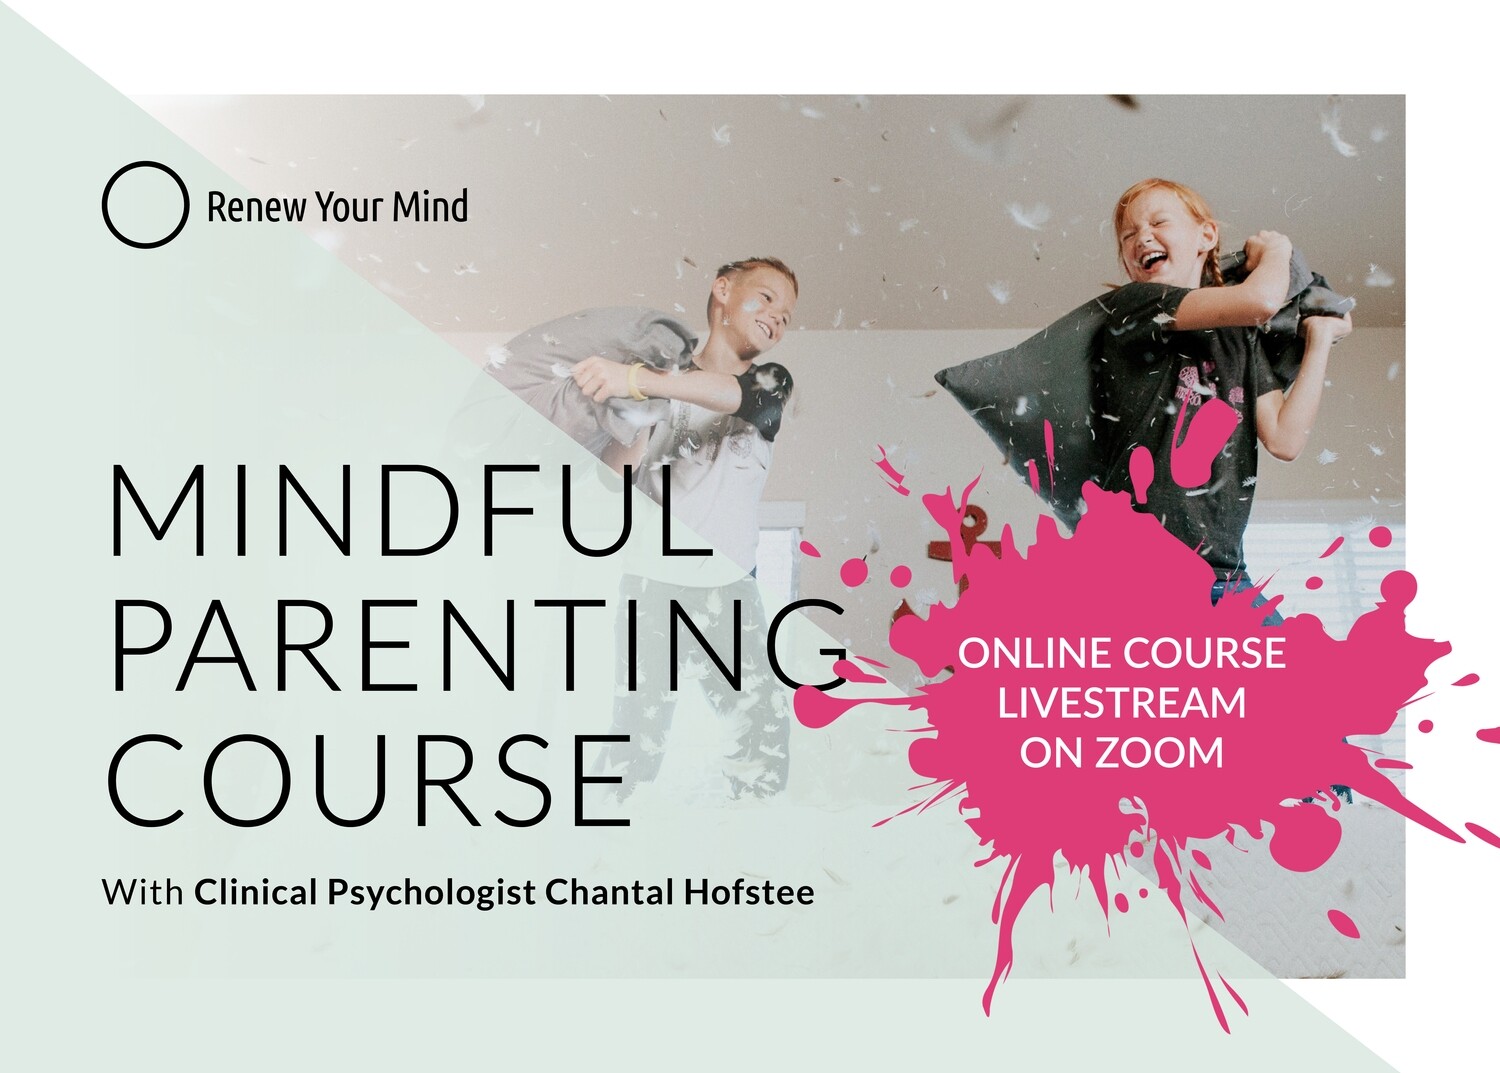 Online Mindful Parenting course: 6 session course, starting Tue 17 May '22 - through Parenting Place